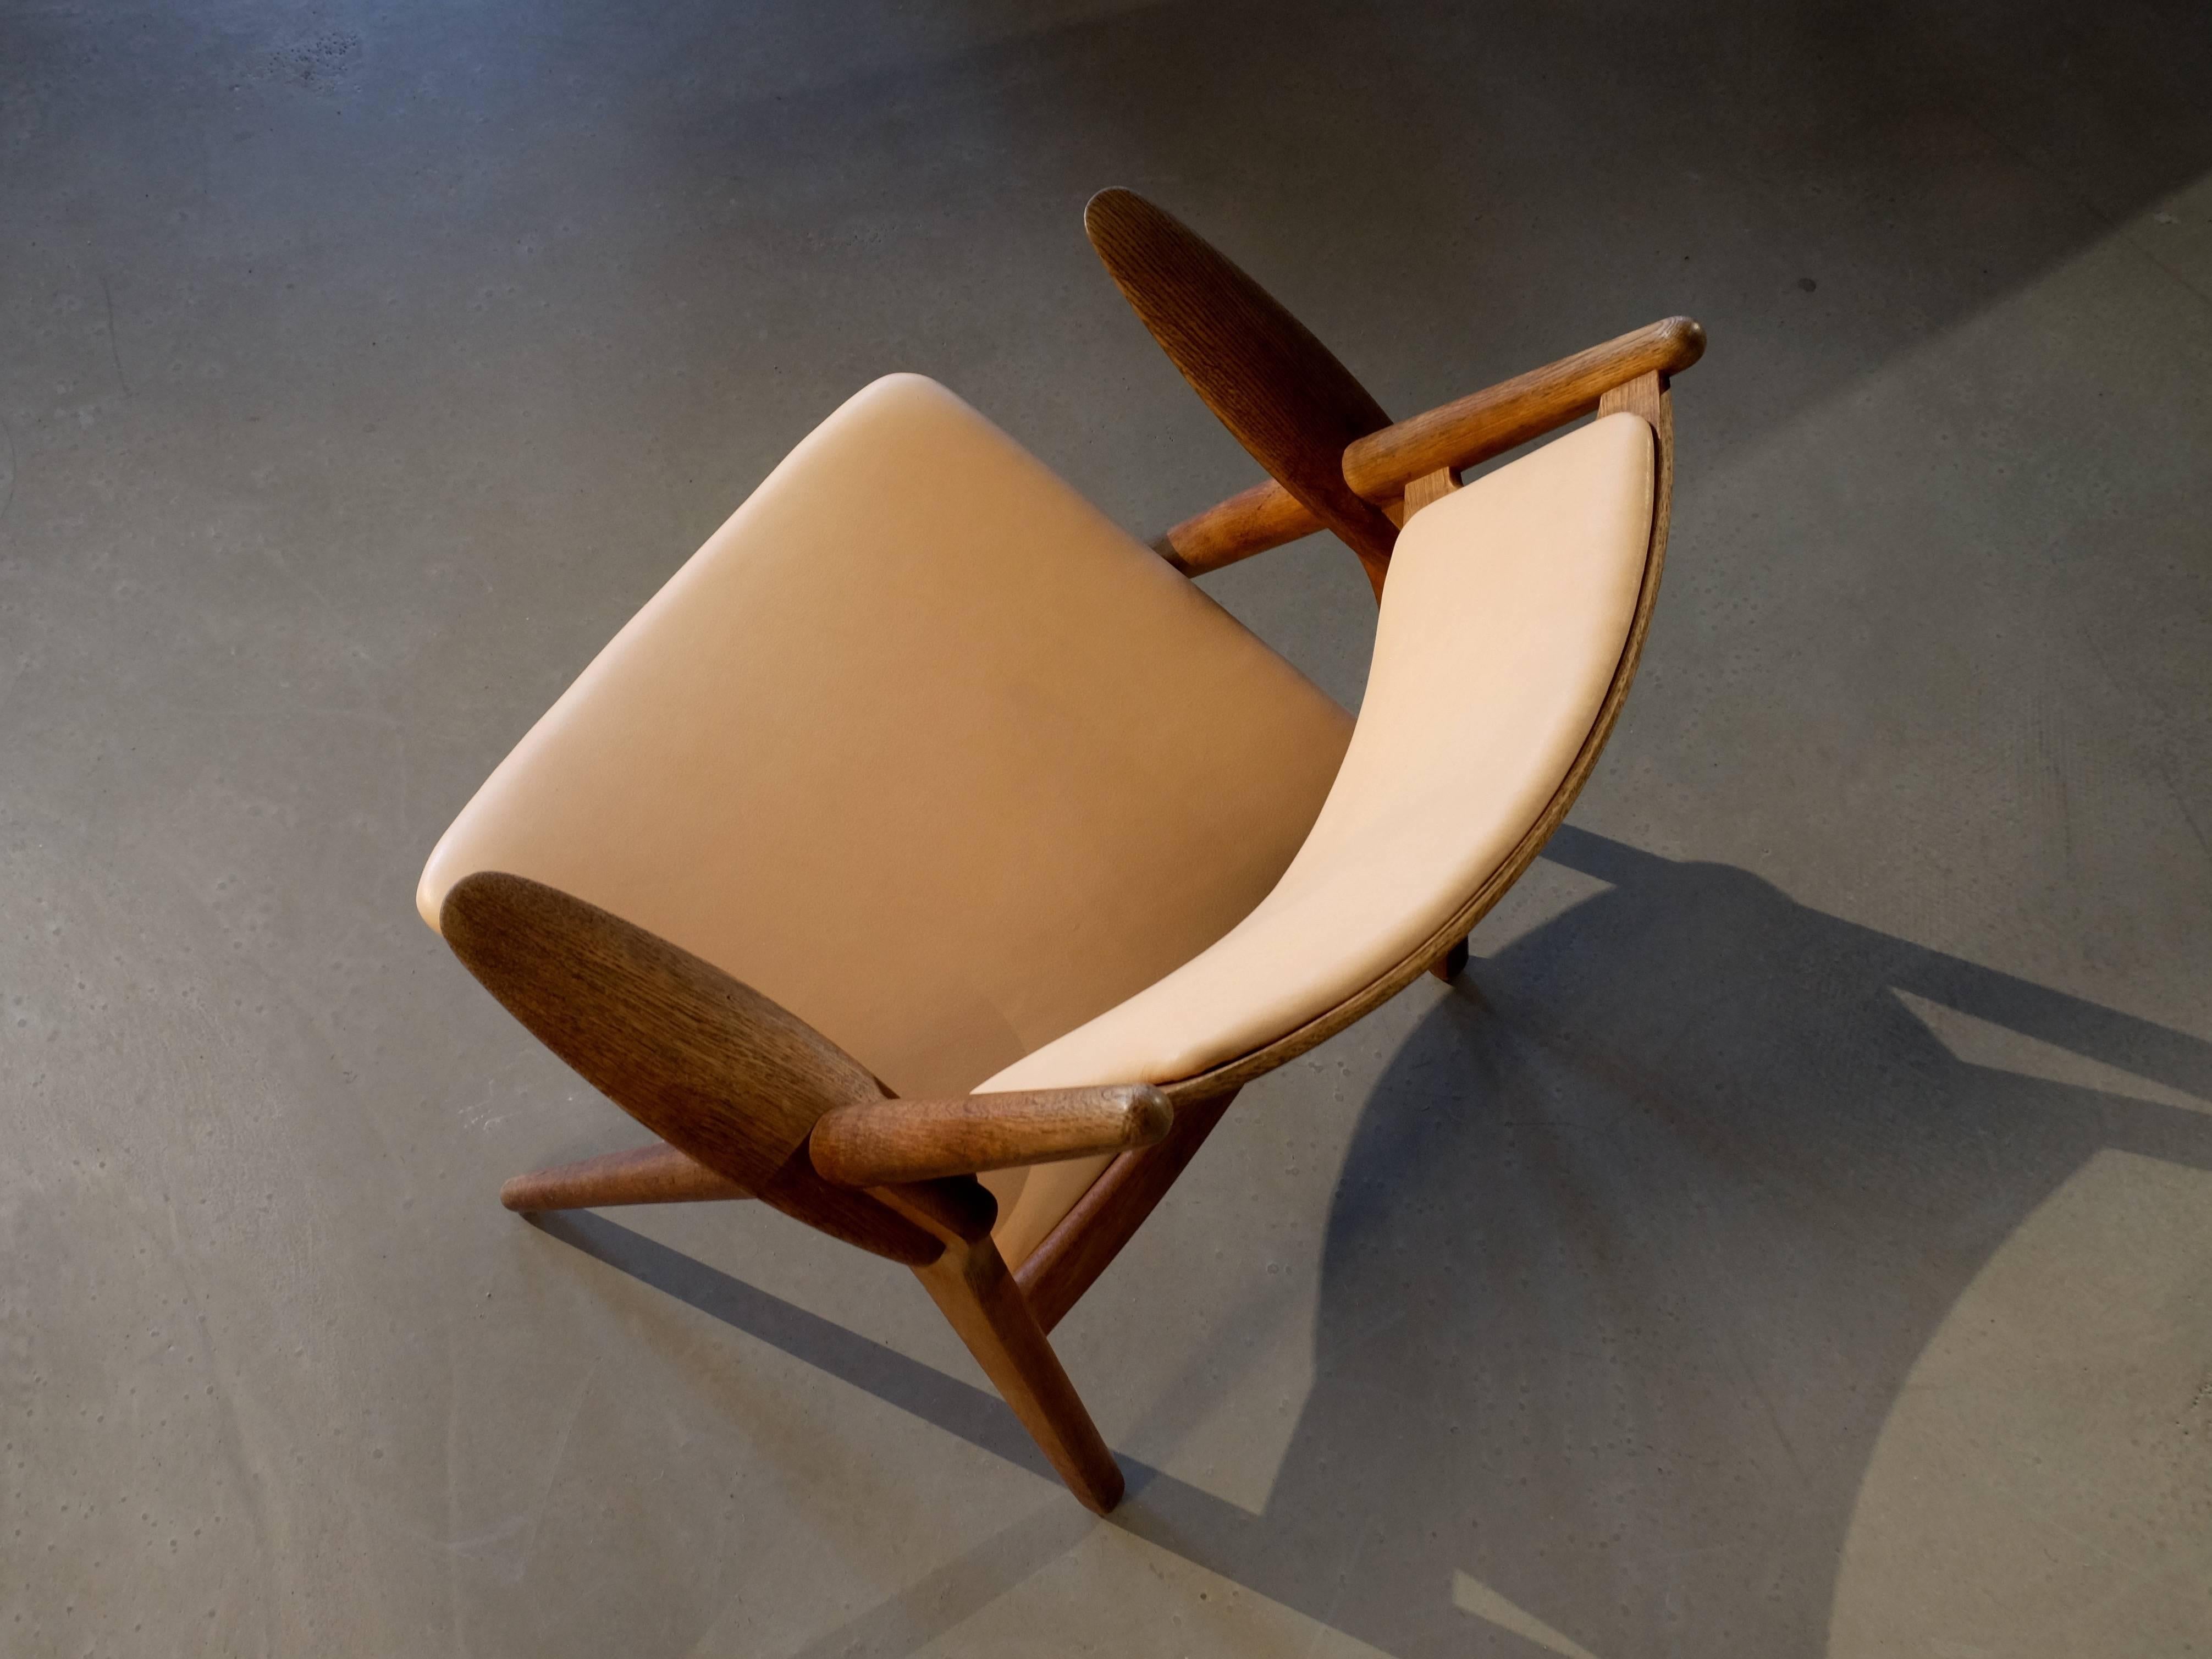 CH-28 sawbuck lounge chair designed by Hans J. Wegner for Carl Hansen & Sons, 1950s.

- New natural leather. 
- Teak and oak frame. 
- Global front door shipping USD 499.

         